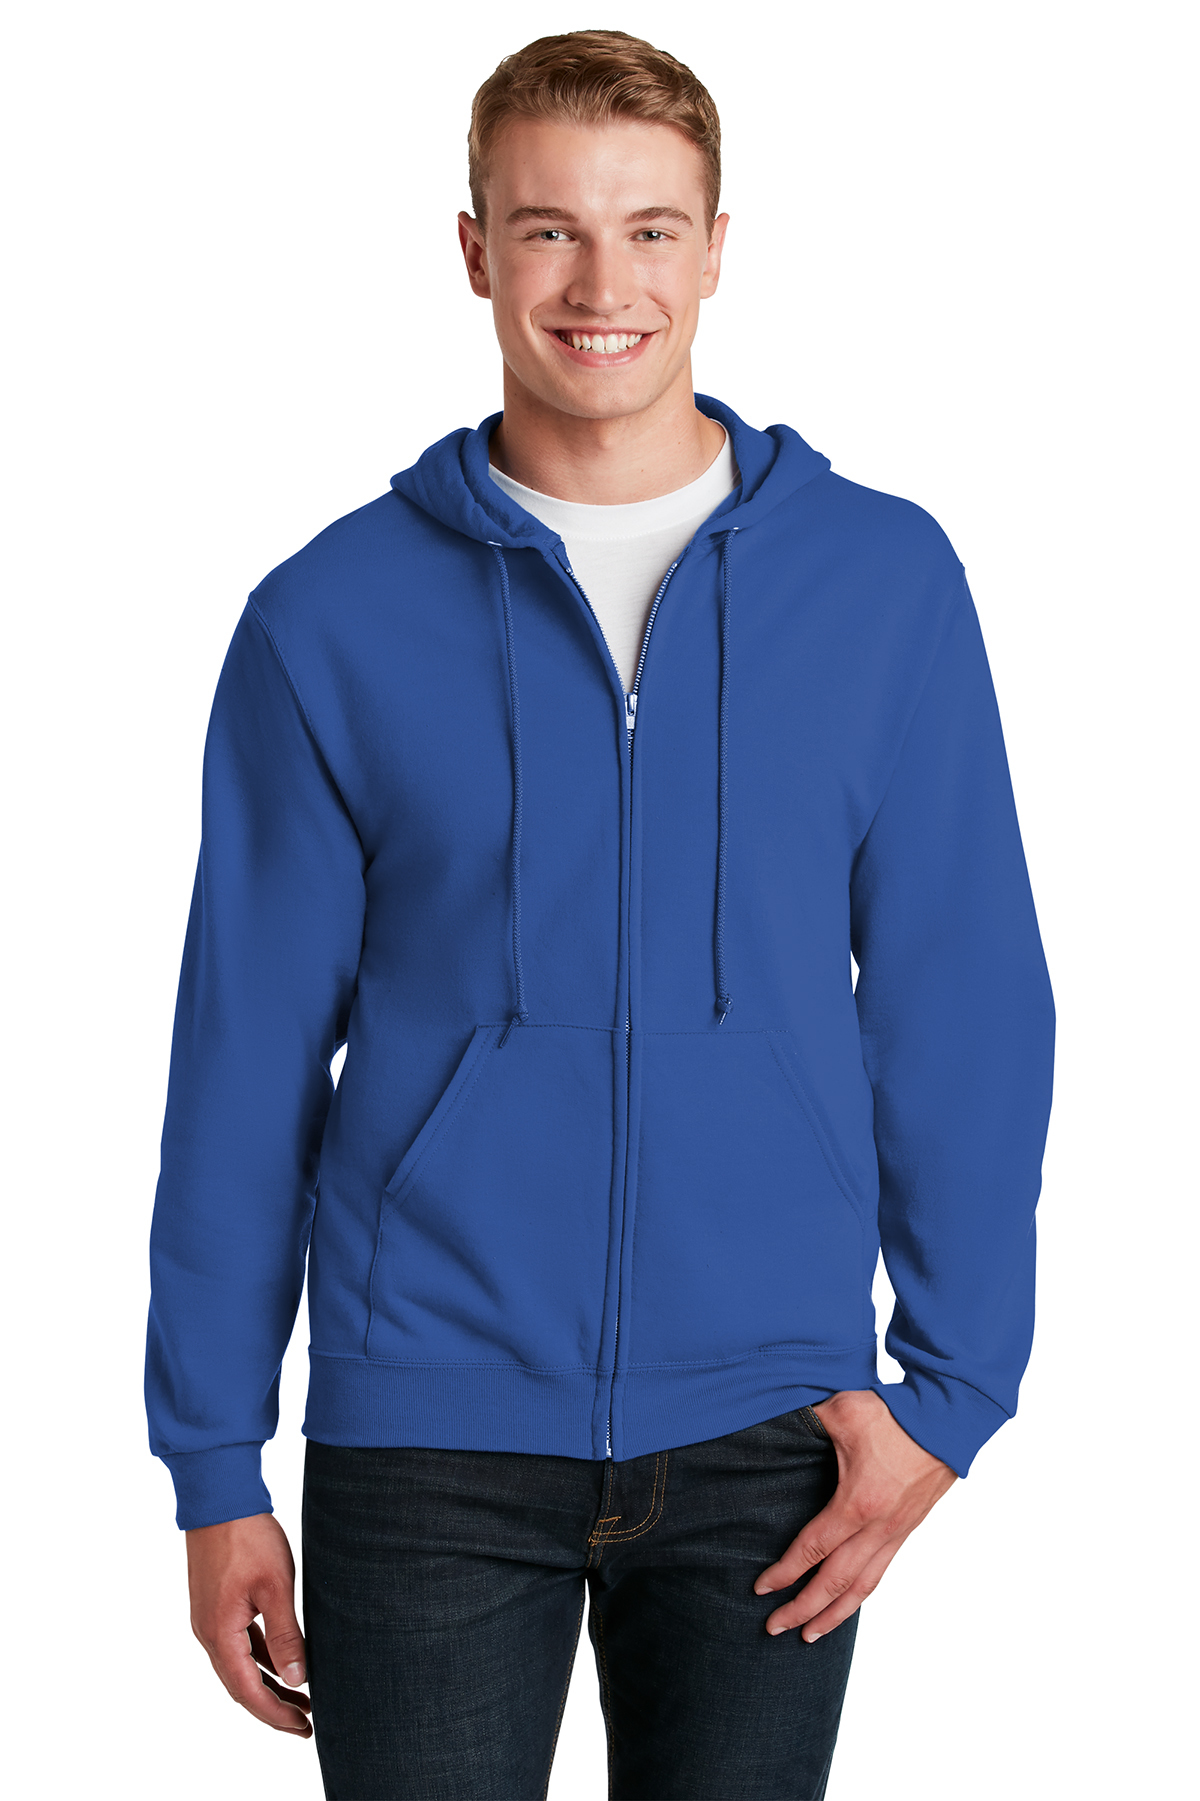 Mens Jerzees Hoody Sweatshirts, Custom Embroidered With Your Logo!